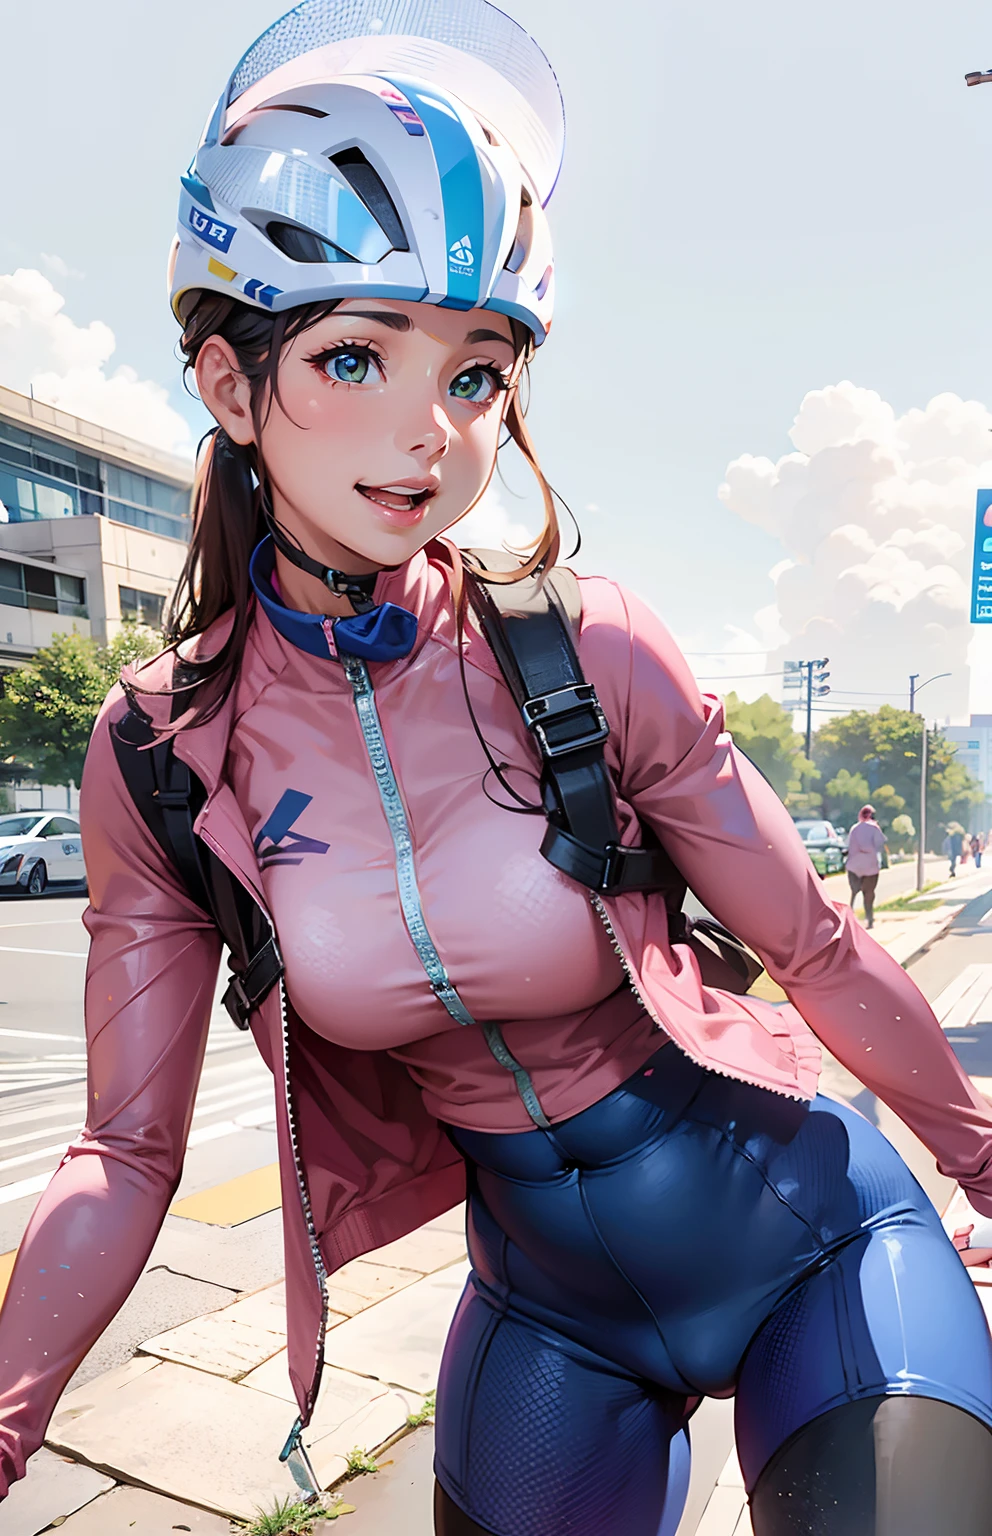 Woman riding a bicycle in a pink shirt and blue shorts, Wearing a white bicycle helmet, thicc, huge tit, Plump crotch, Fitness model, A smile, Cycling!!